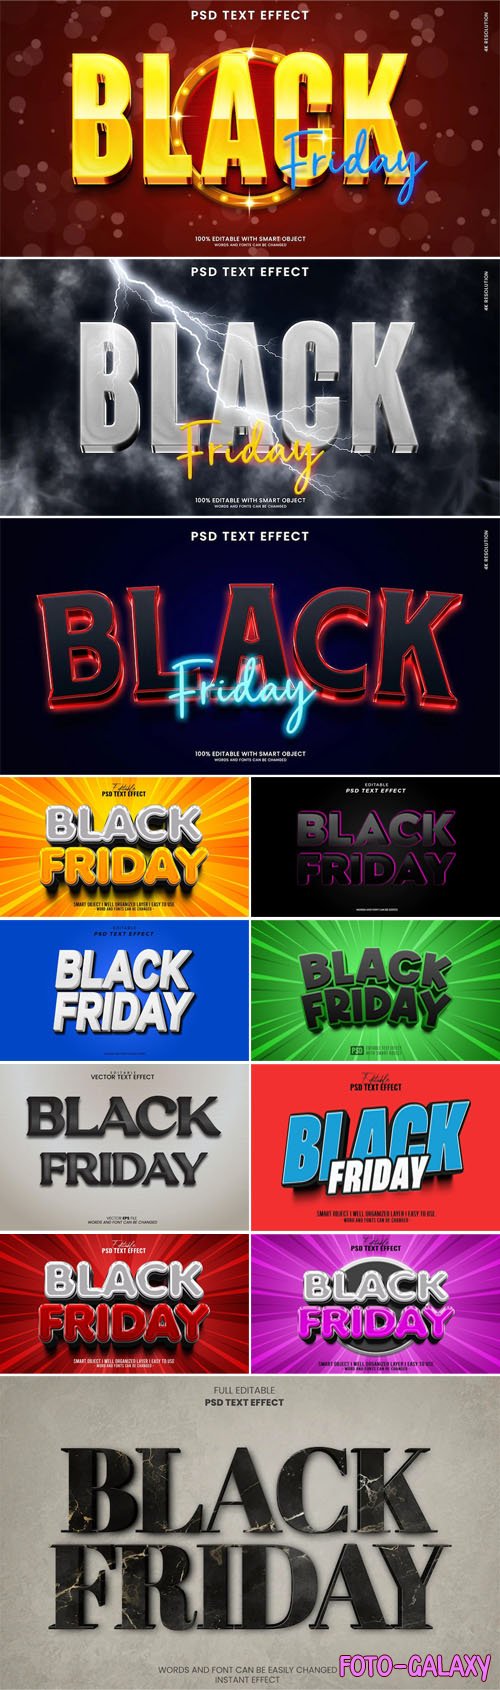 20+ Modern Black Friday 3D Text Effects for Photoshop & Illustrator[Vol.2]